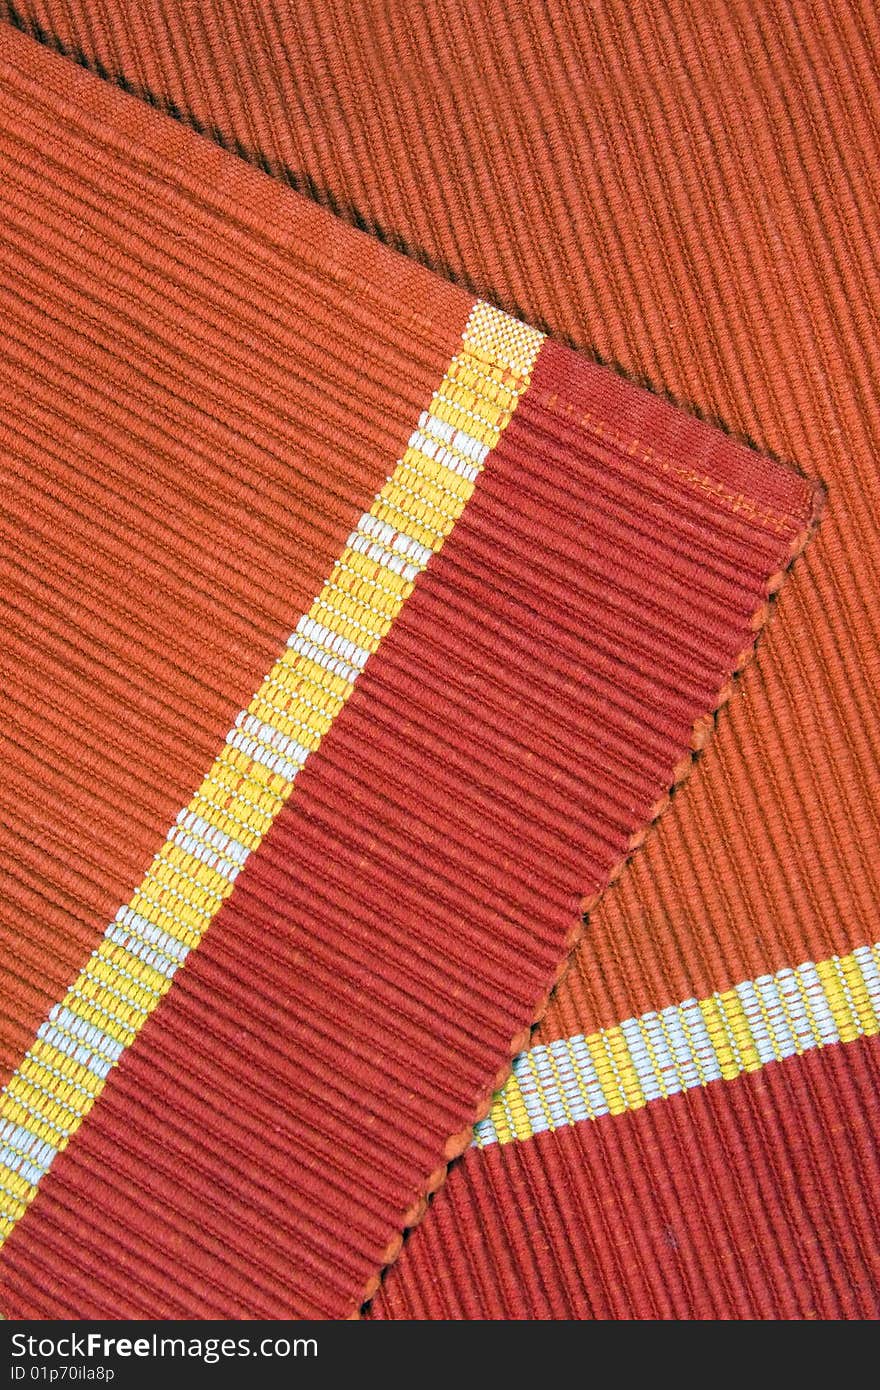 Cloth towel with embroidery and decoration